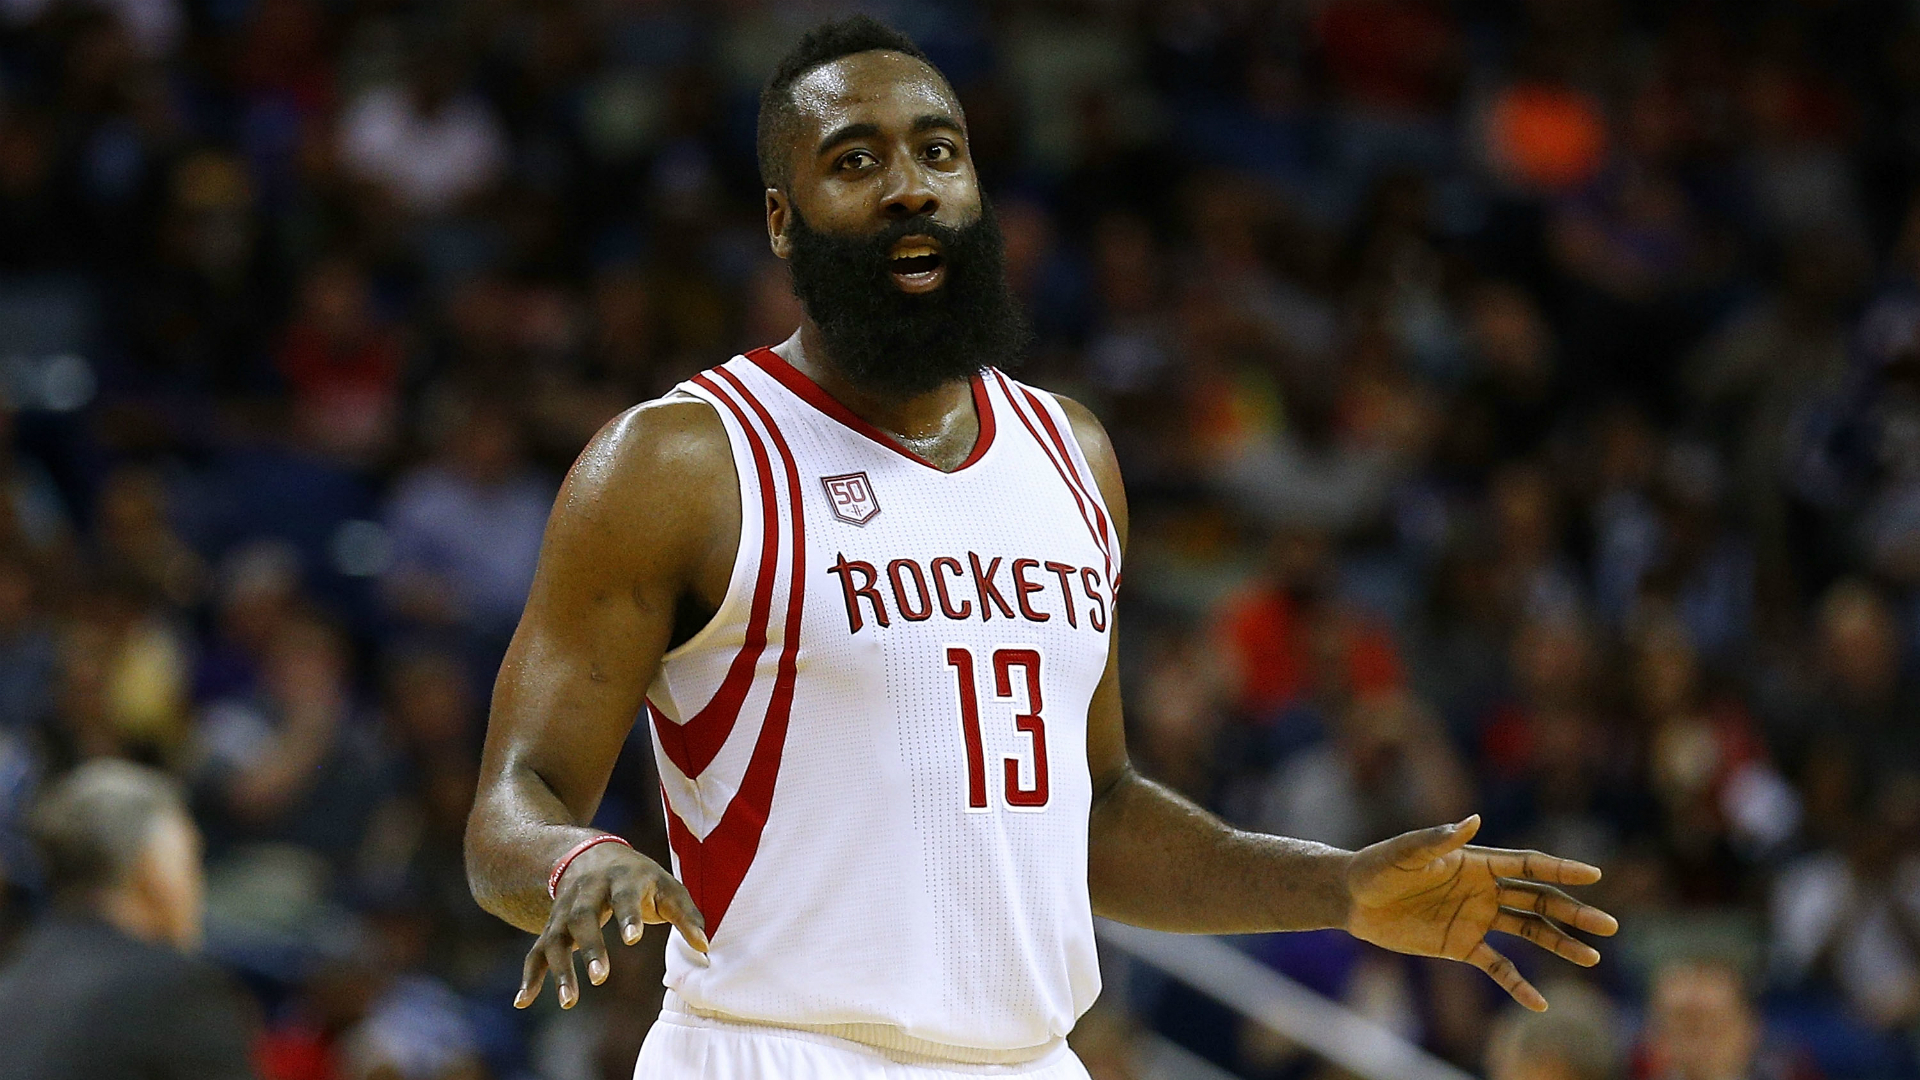 NBA wrap: Rockets move to 21-1 with Harden, Paul, Capela trio on the court